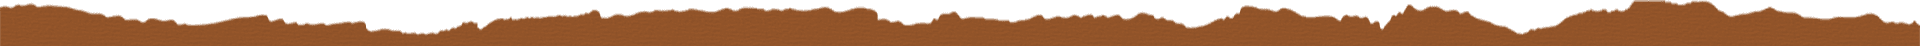 A brown and green background with a mountain in the middle.